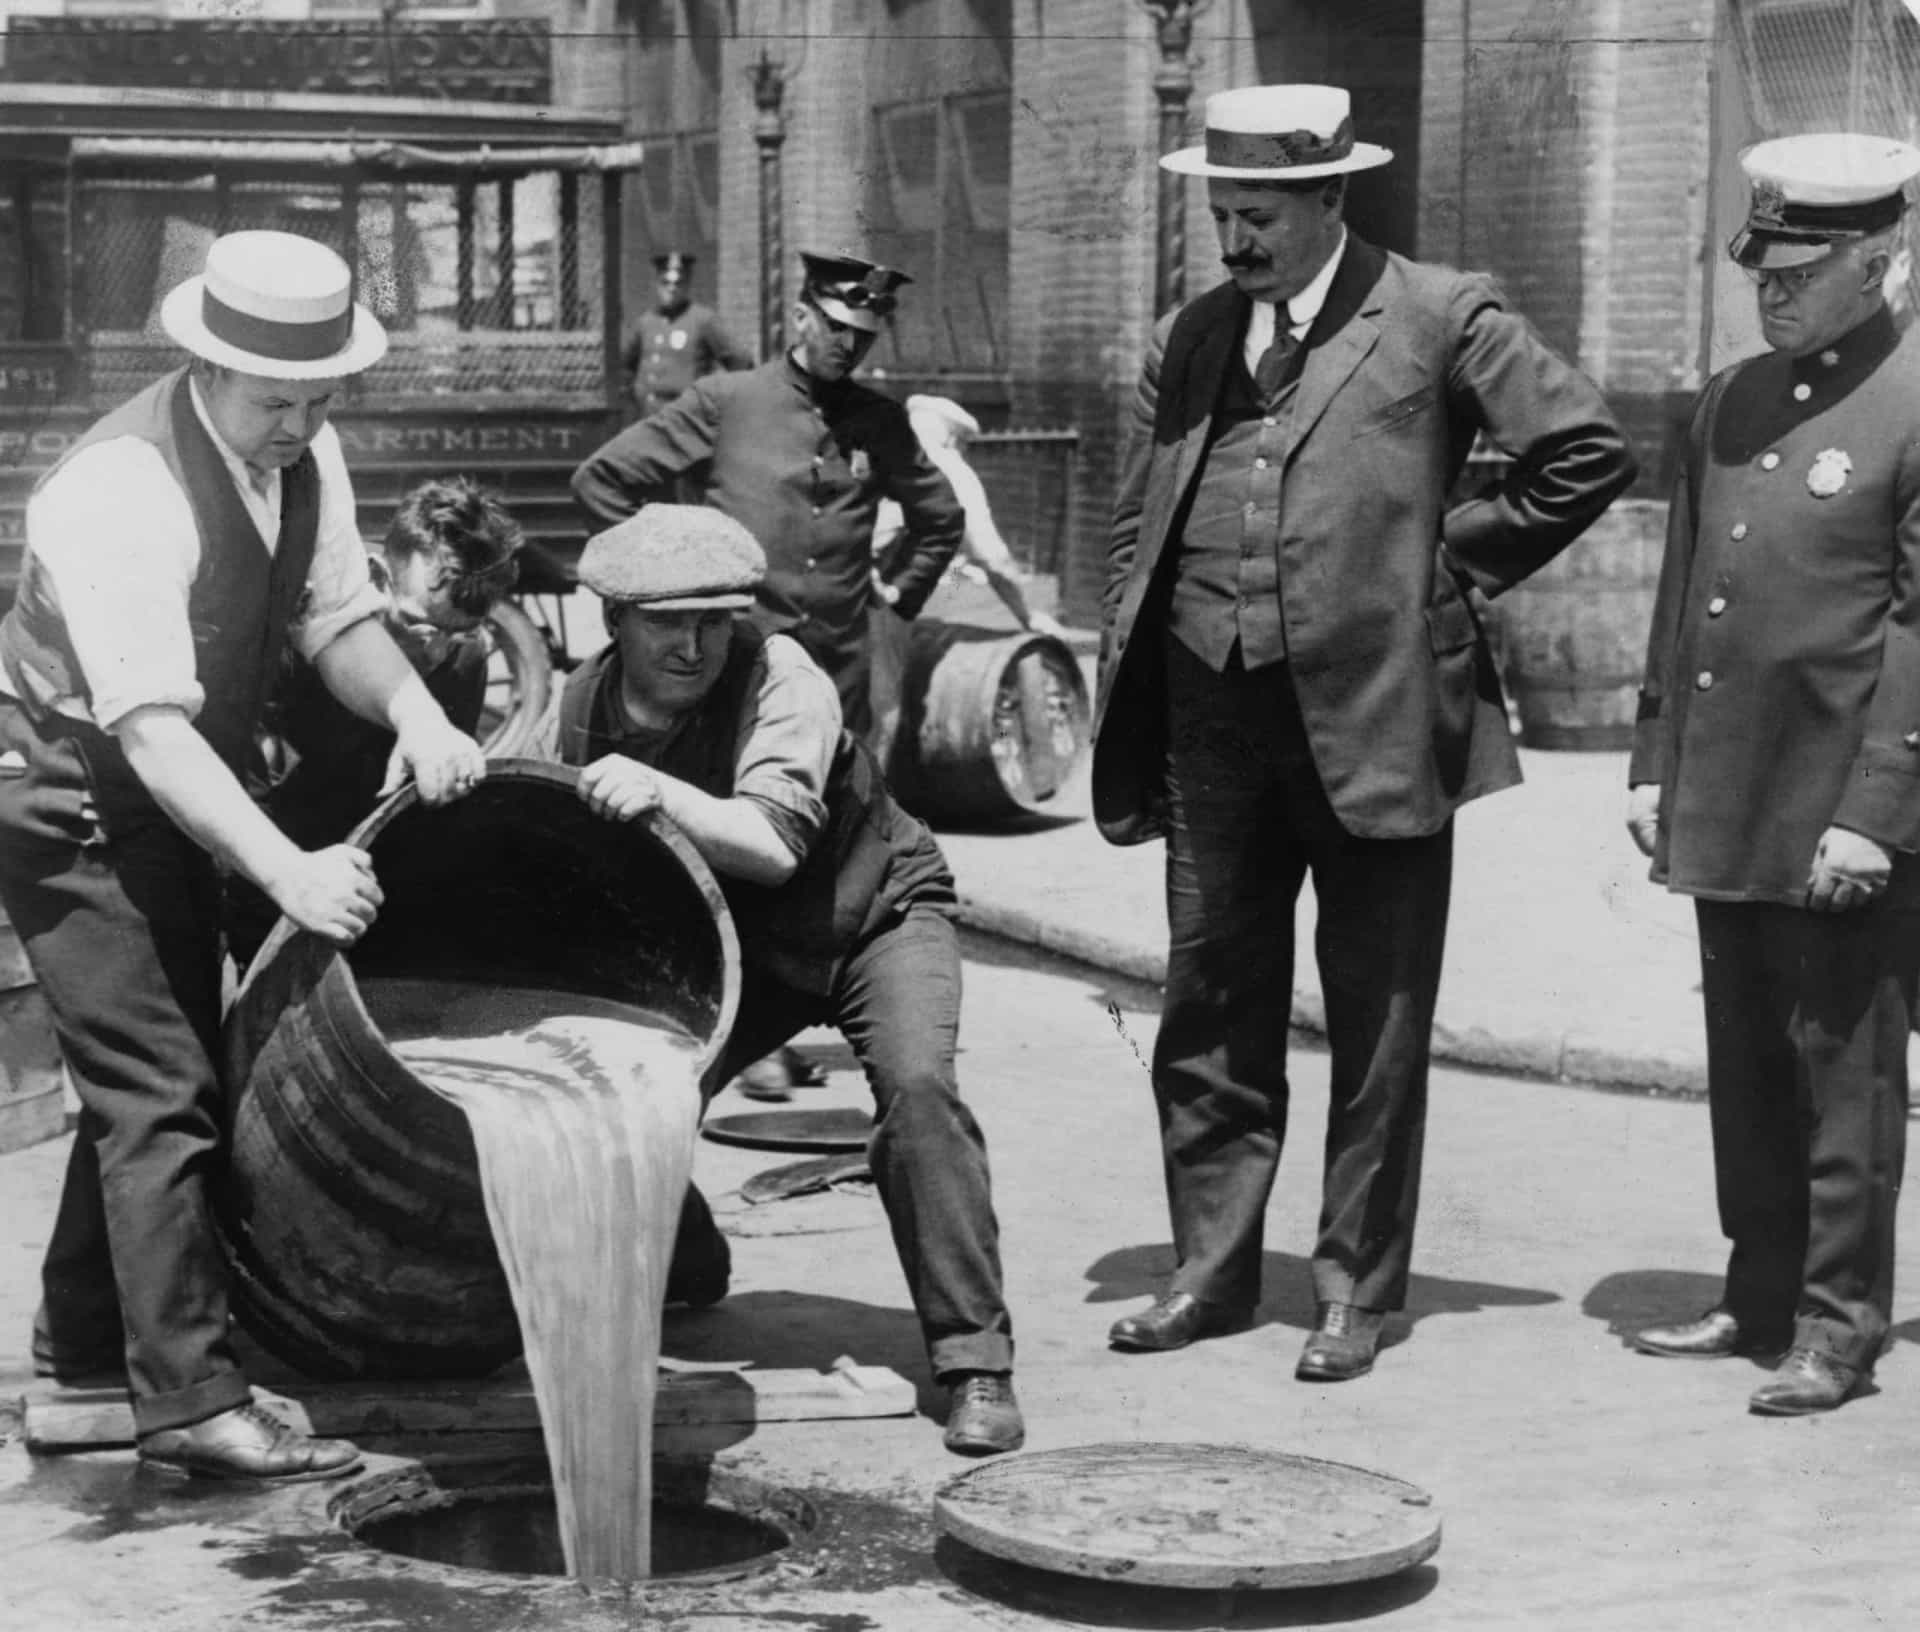 Prohibition: America's era of abstinence